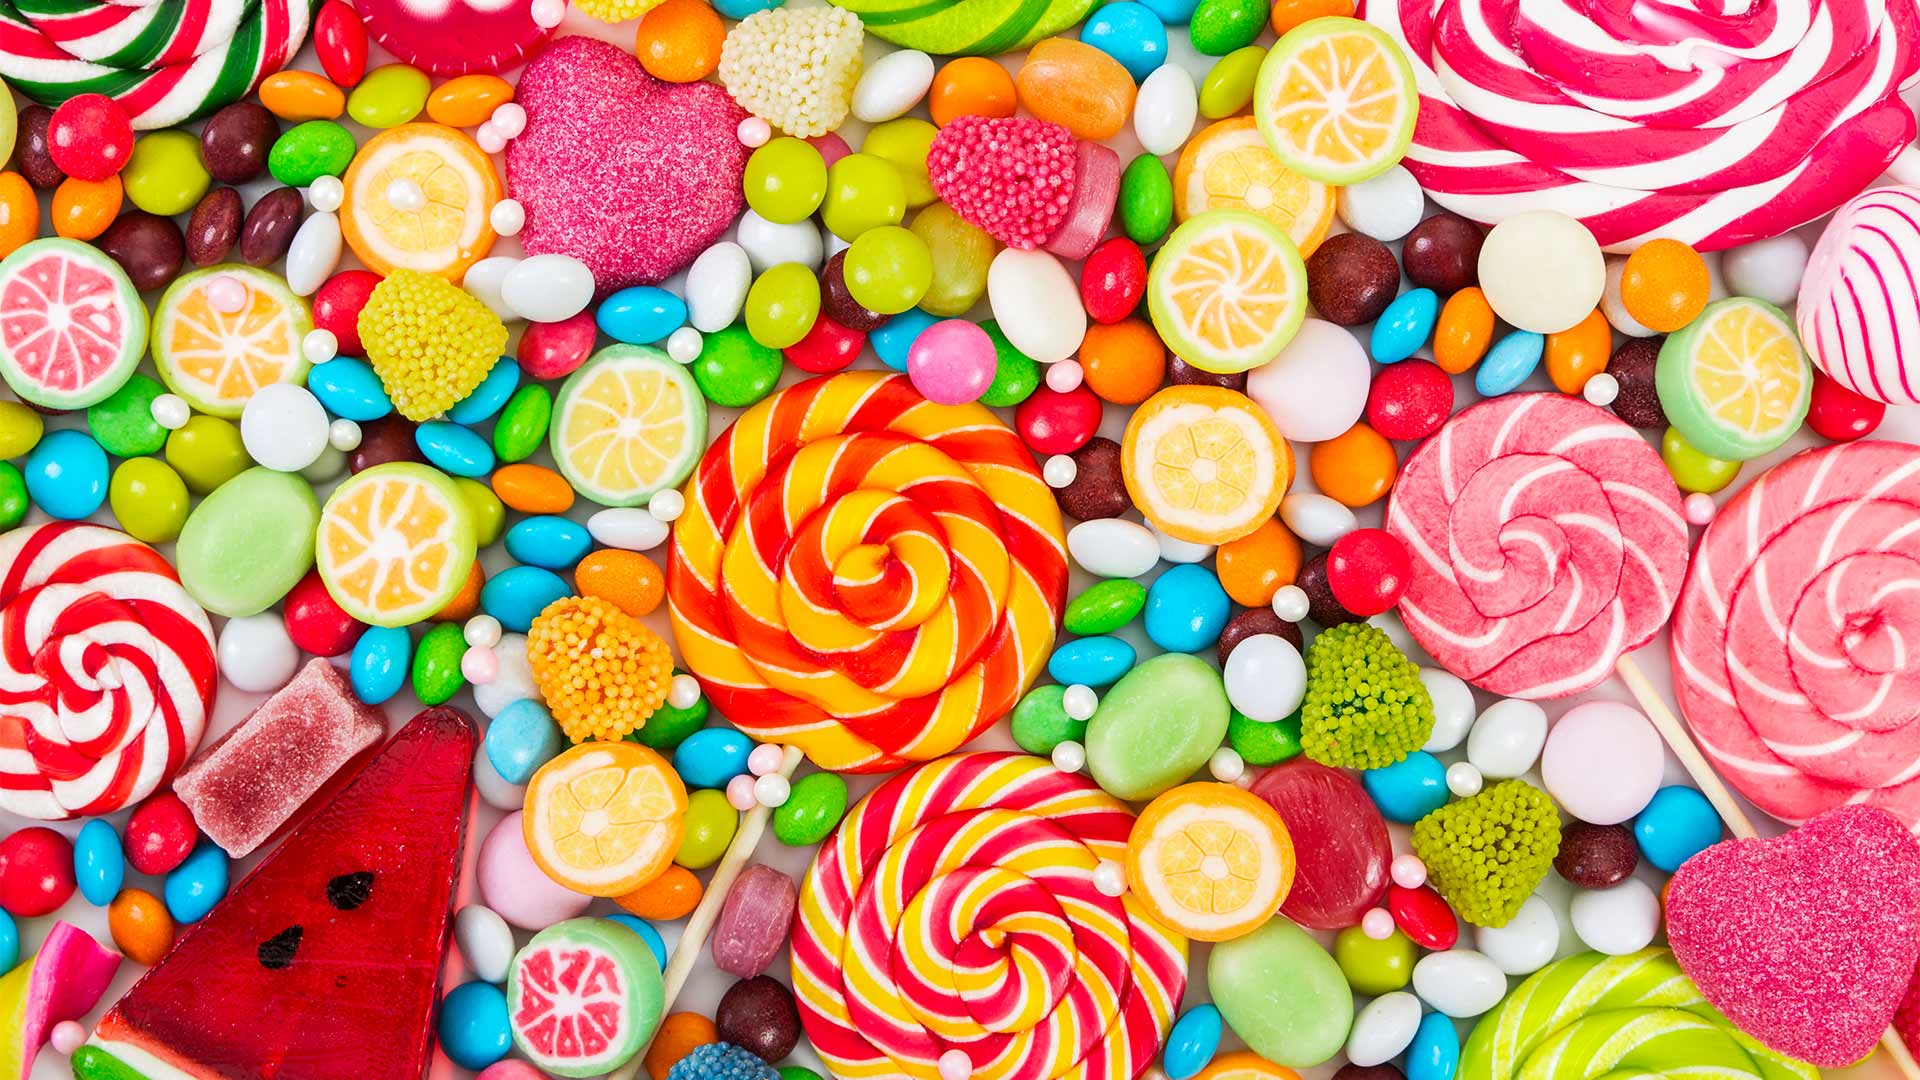 Bunch of sweets laid on table